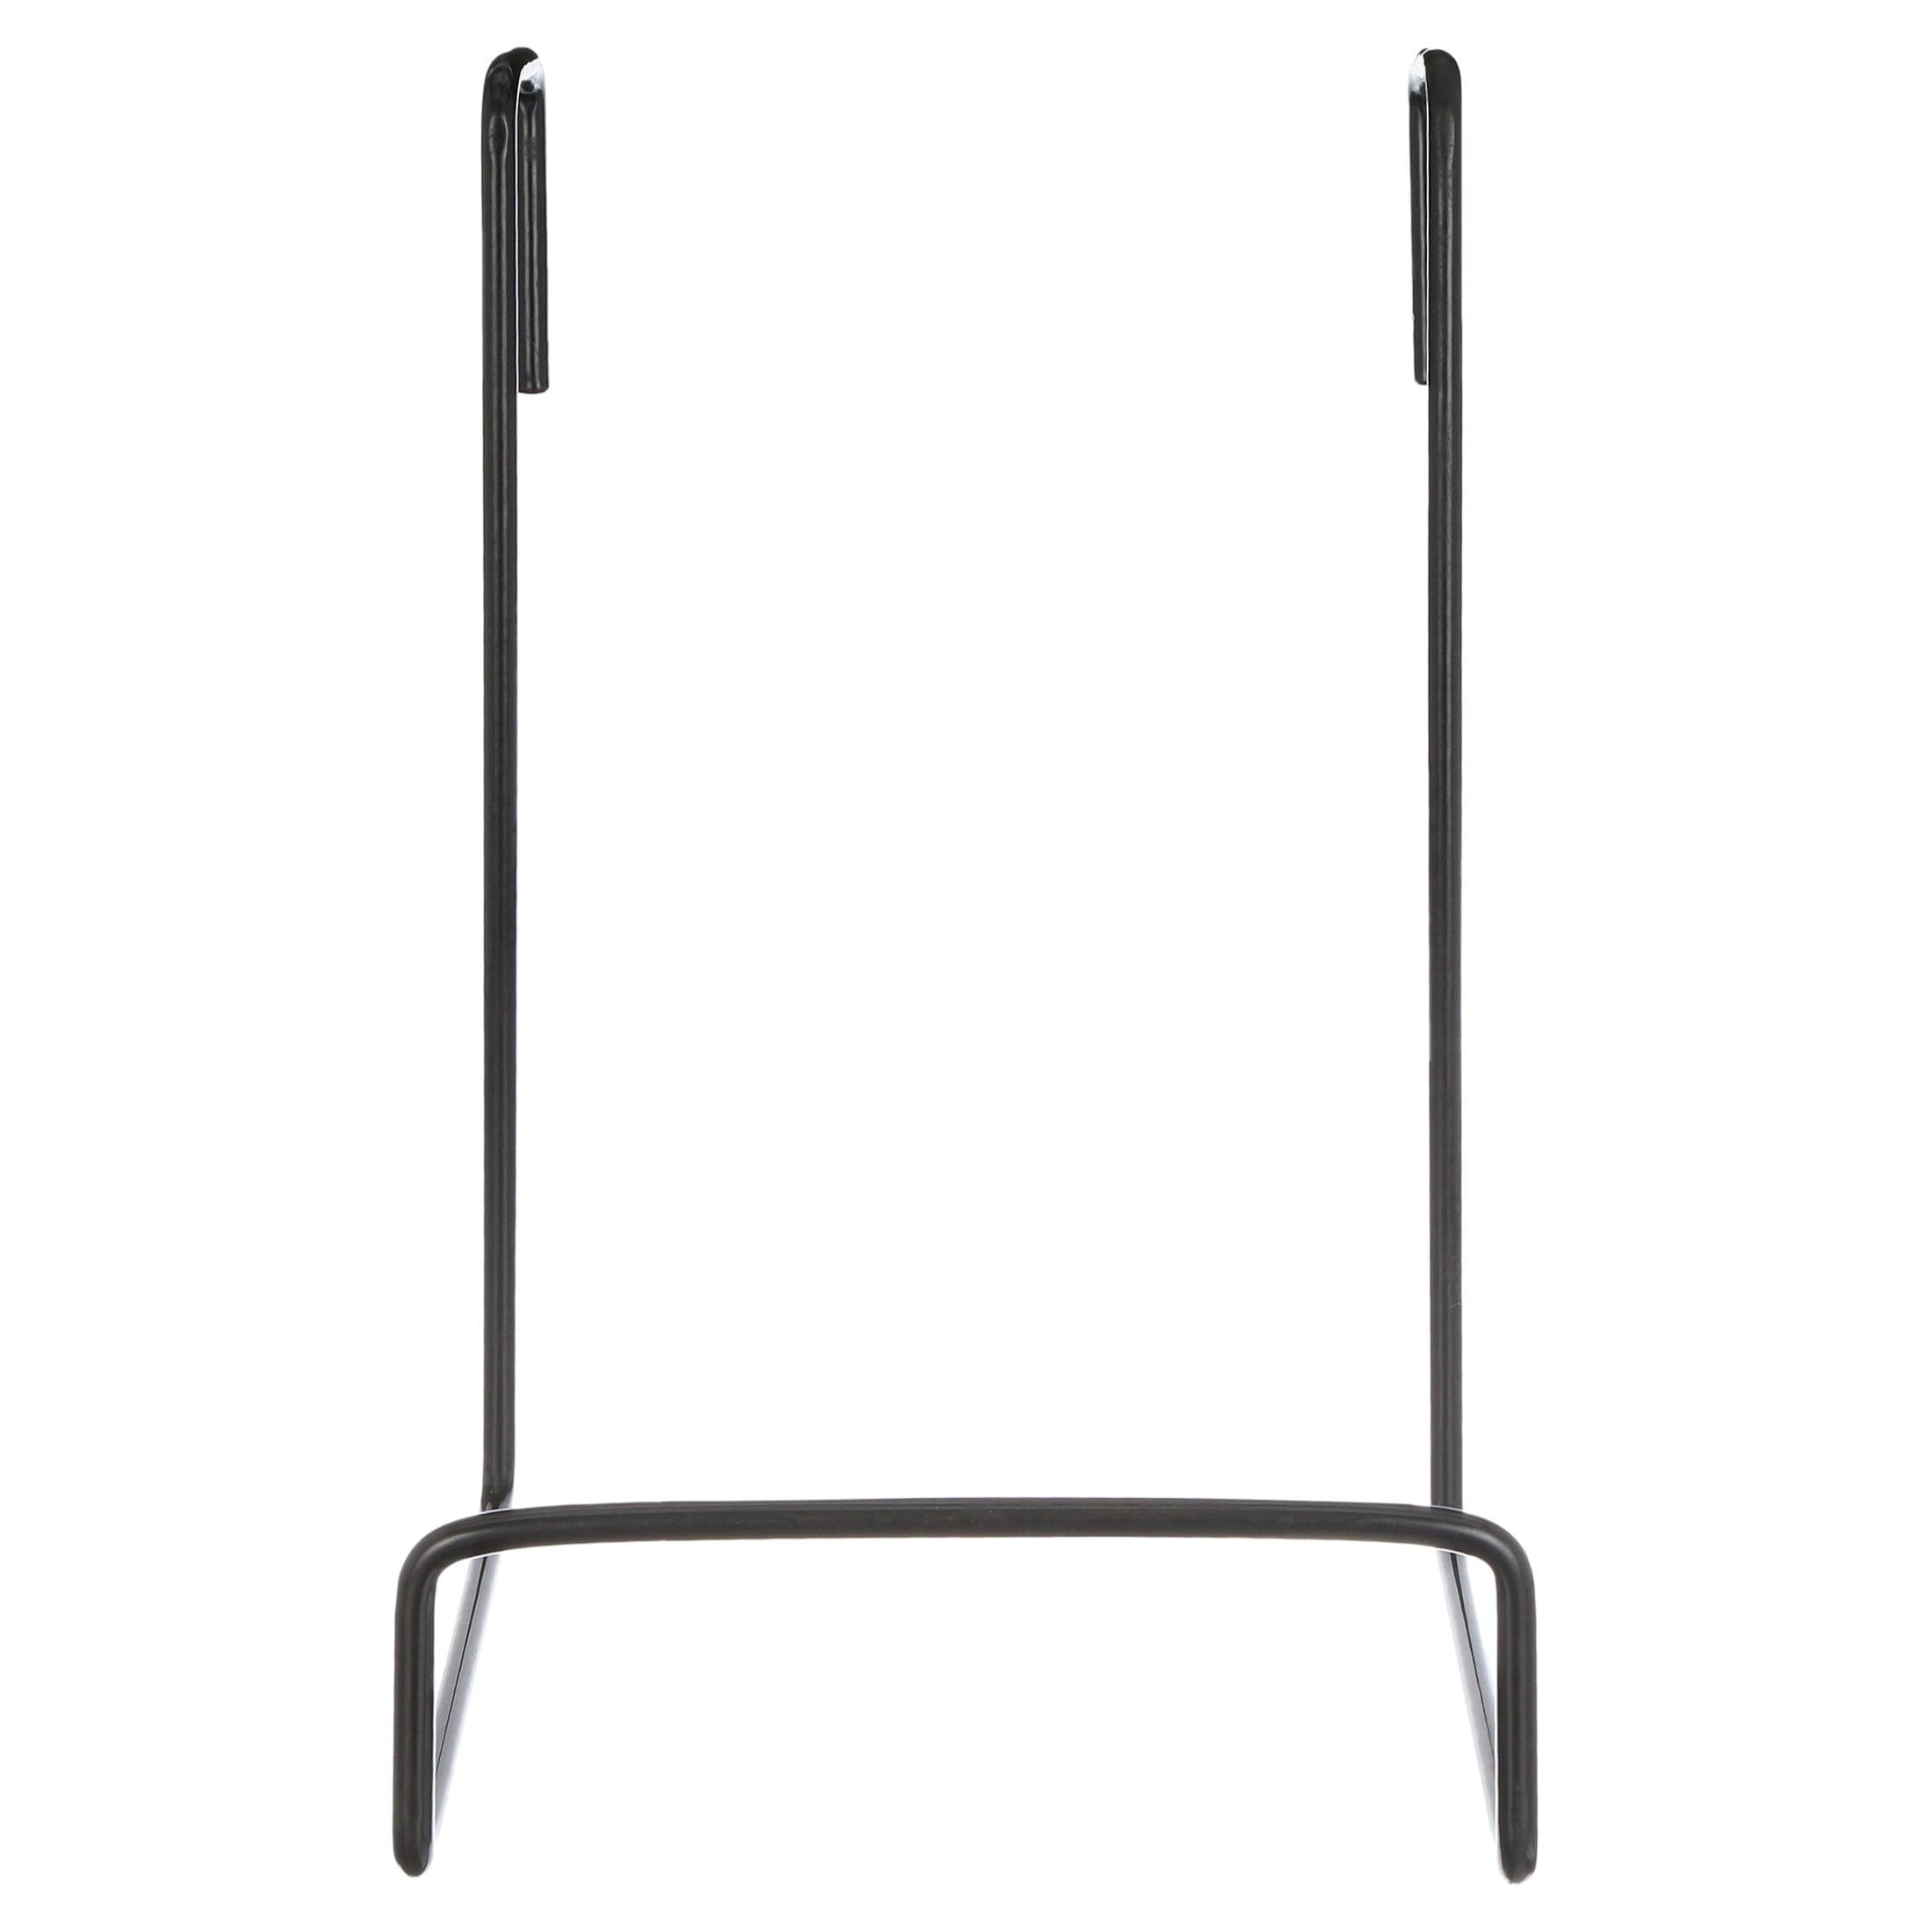 Picnic Beach Chairs During Travel-Black 21029 Camco Heavy Duty Rack-Hook on RV Ladder to Support Folding 